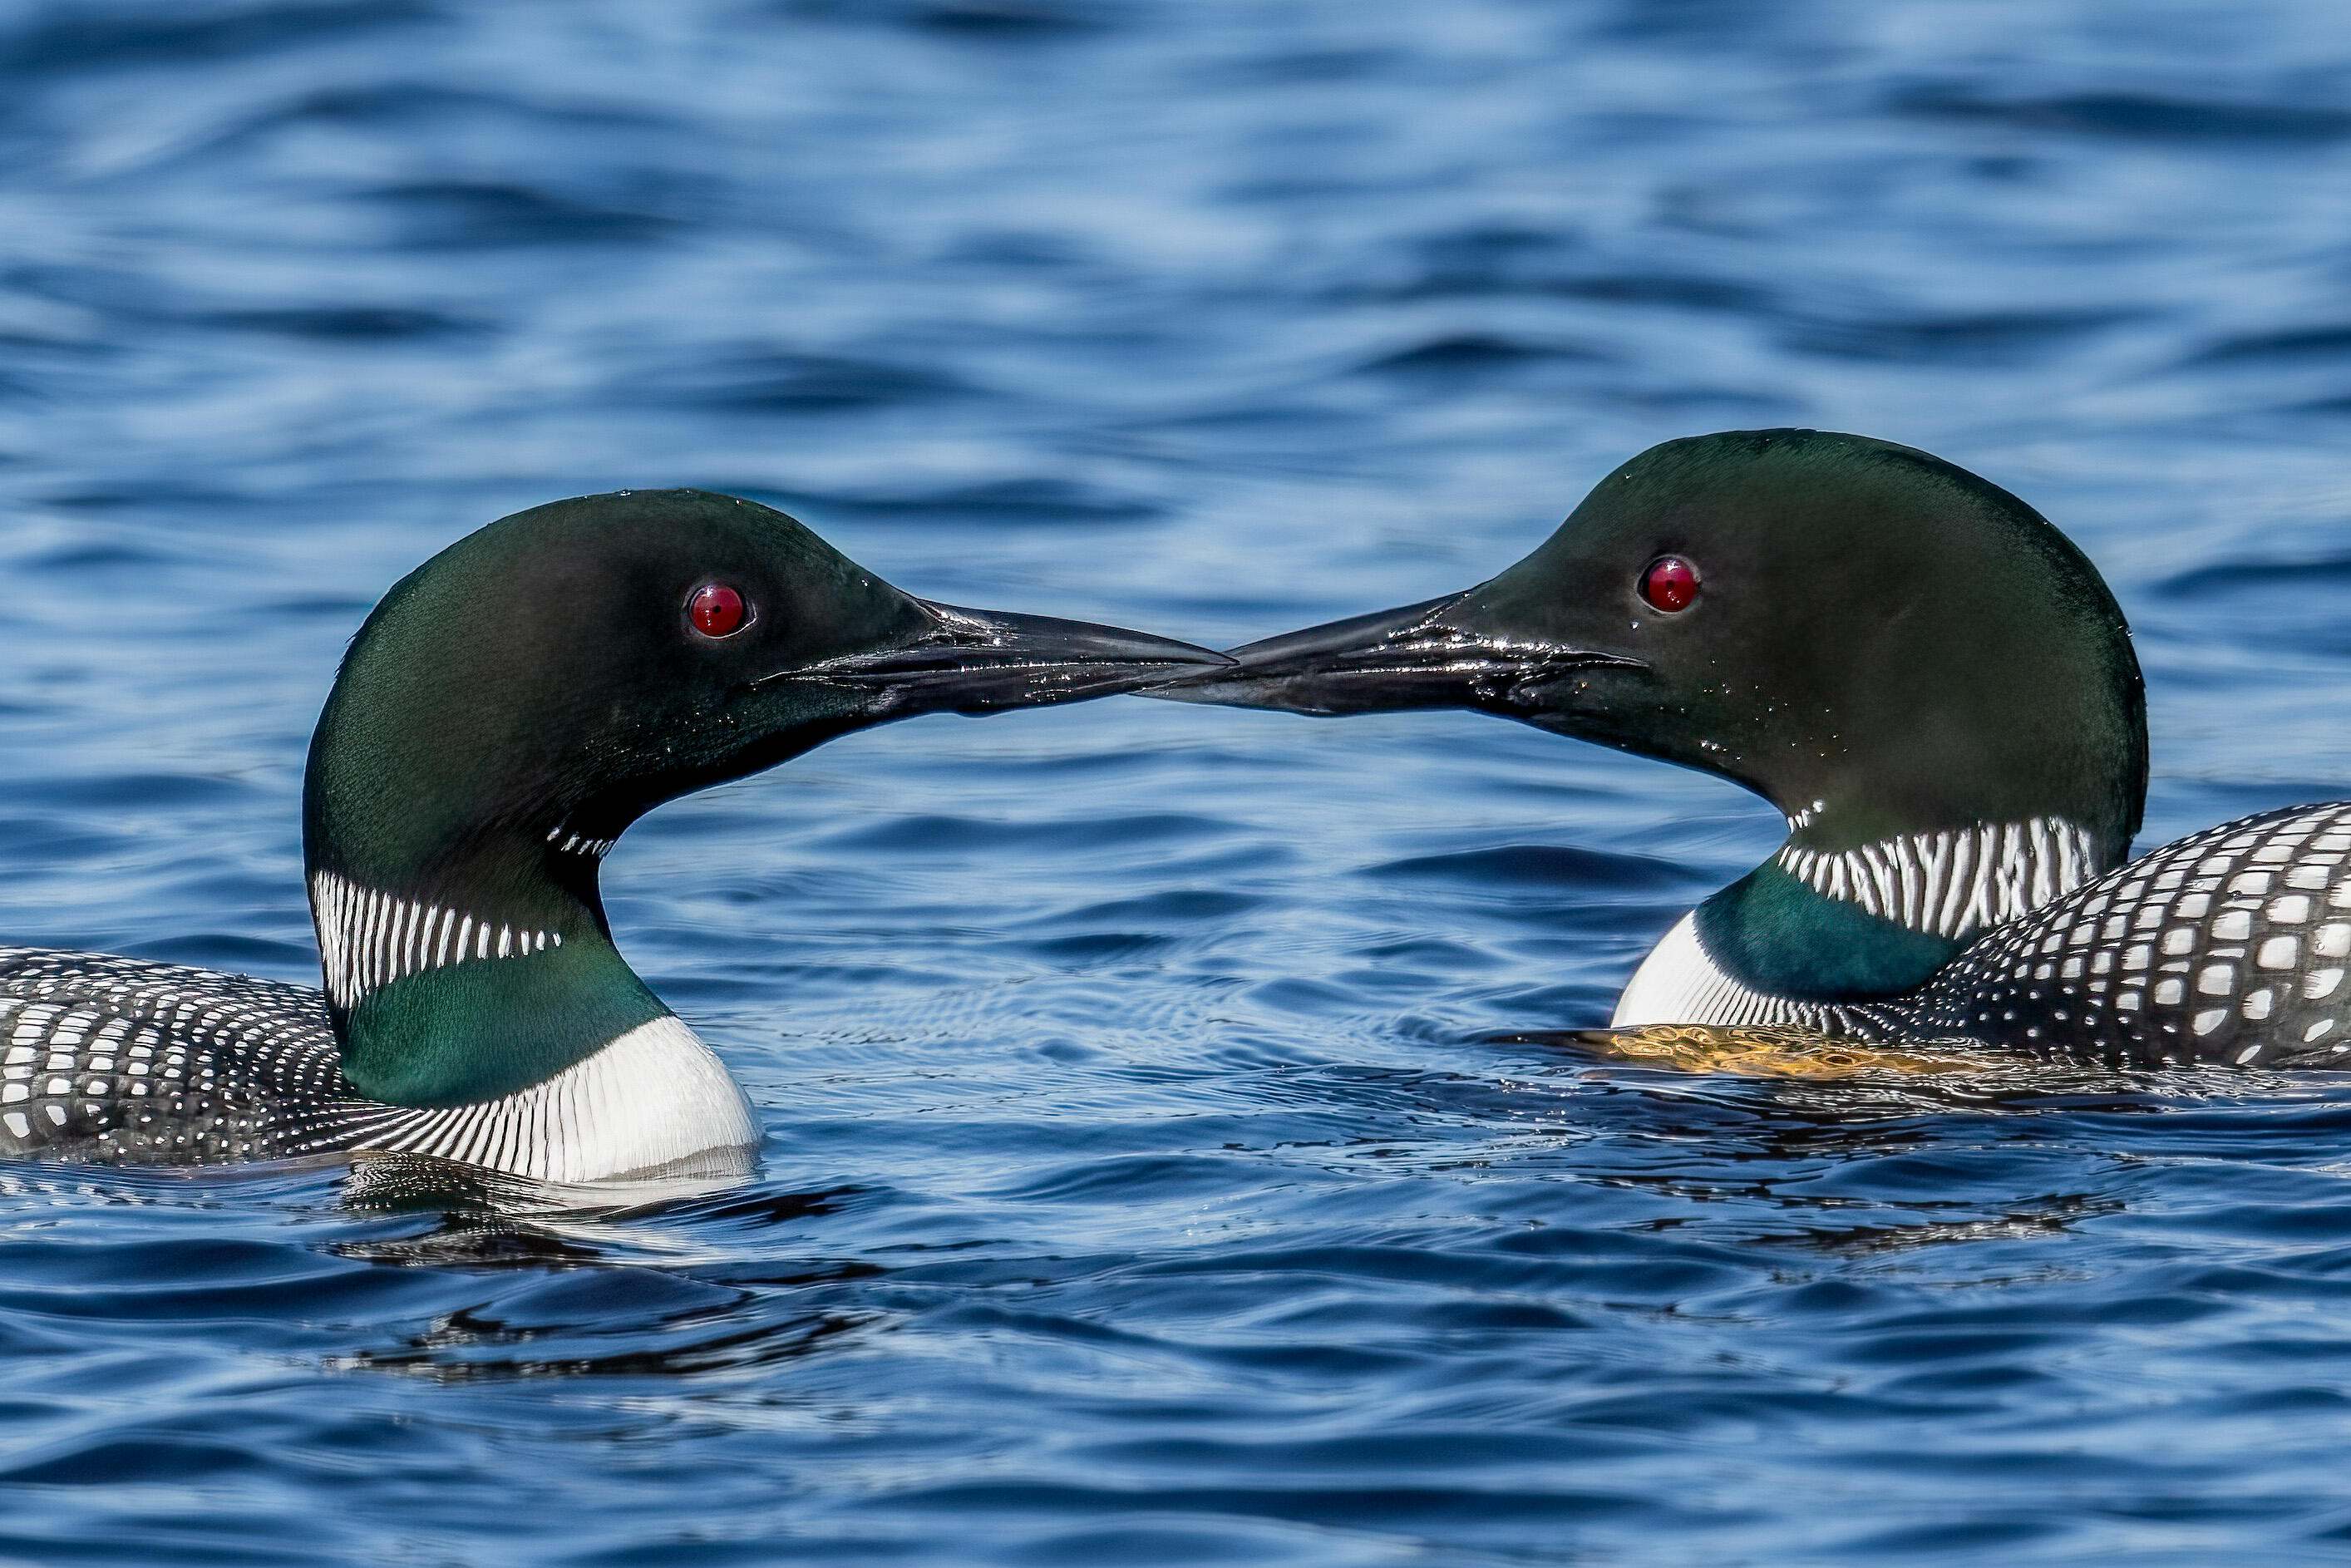 Two common loon birds with black heads and red eyes touch beaks while swimming on water. 